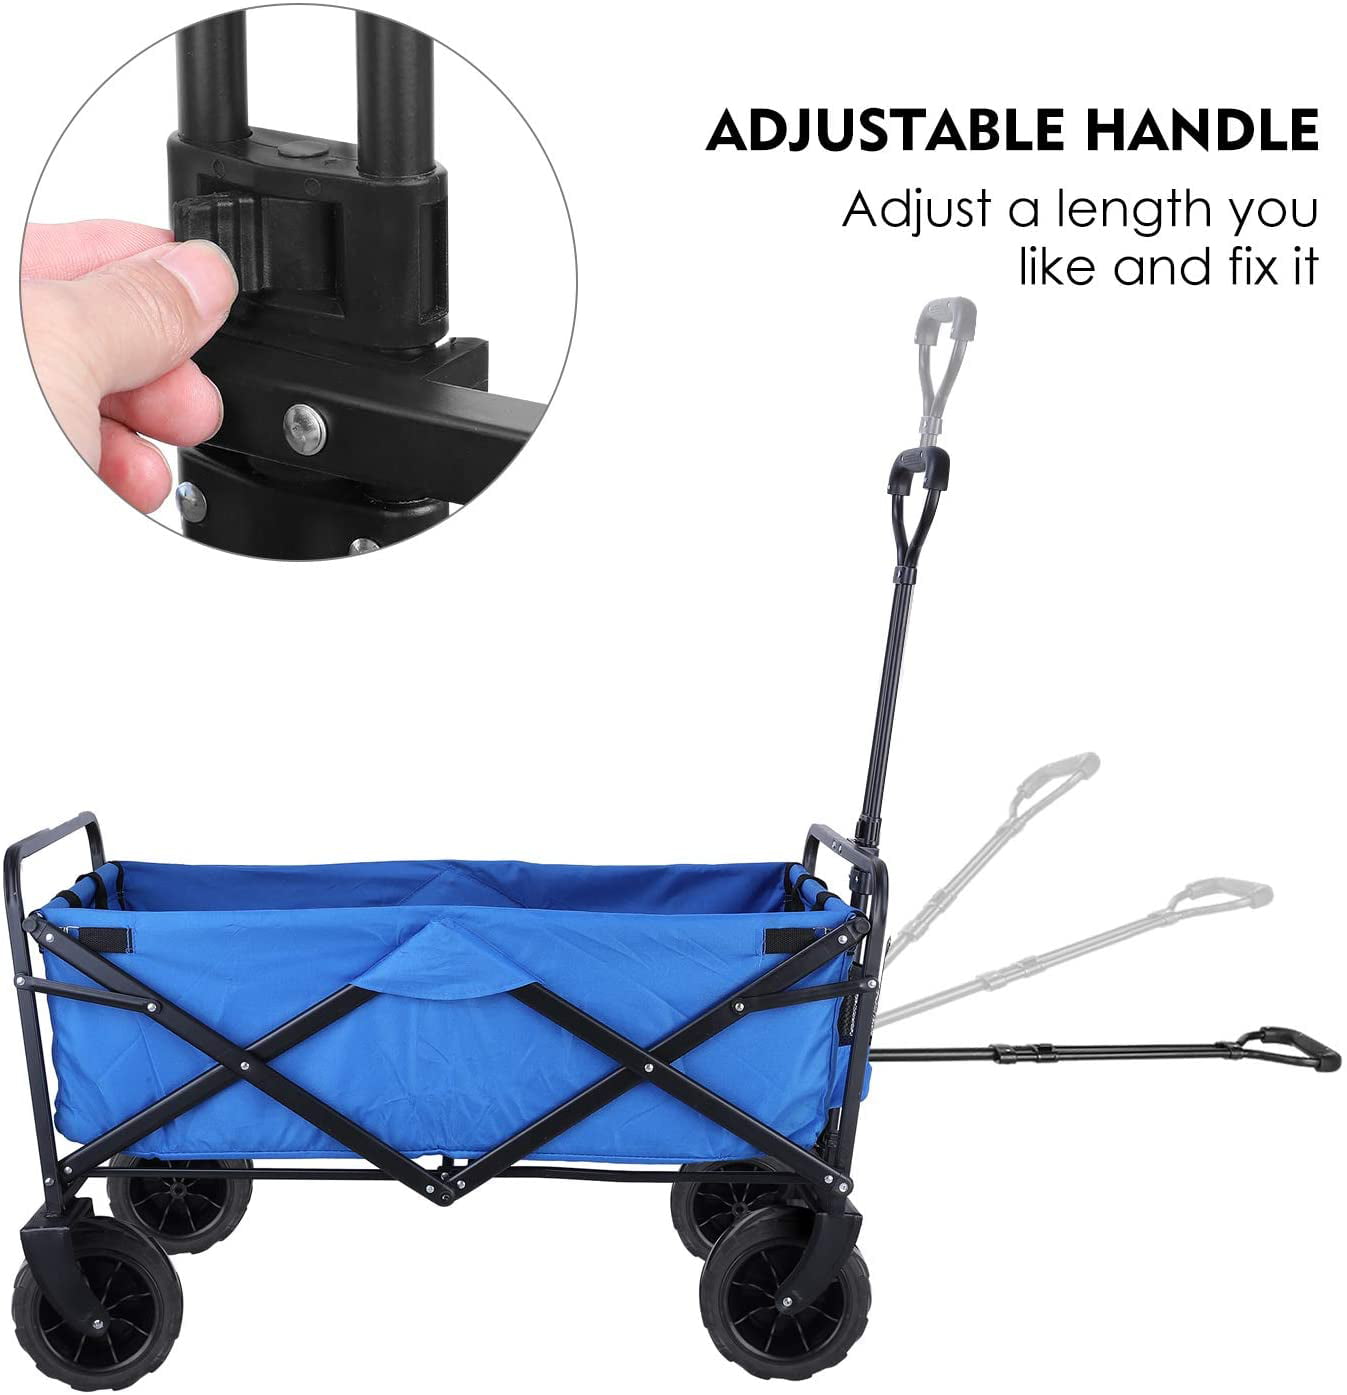 Folding Wagon etc Portable Garden Beach Cart with Wheels Black for Beach Adjustable Handle & Drink Holders Shopping Groceries Heavy Duty Utility Wagon BLUU Collapsible Wagon Cart 